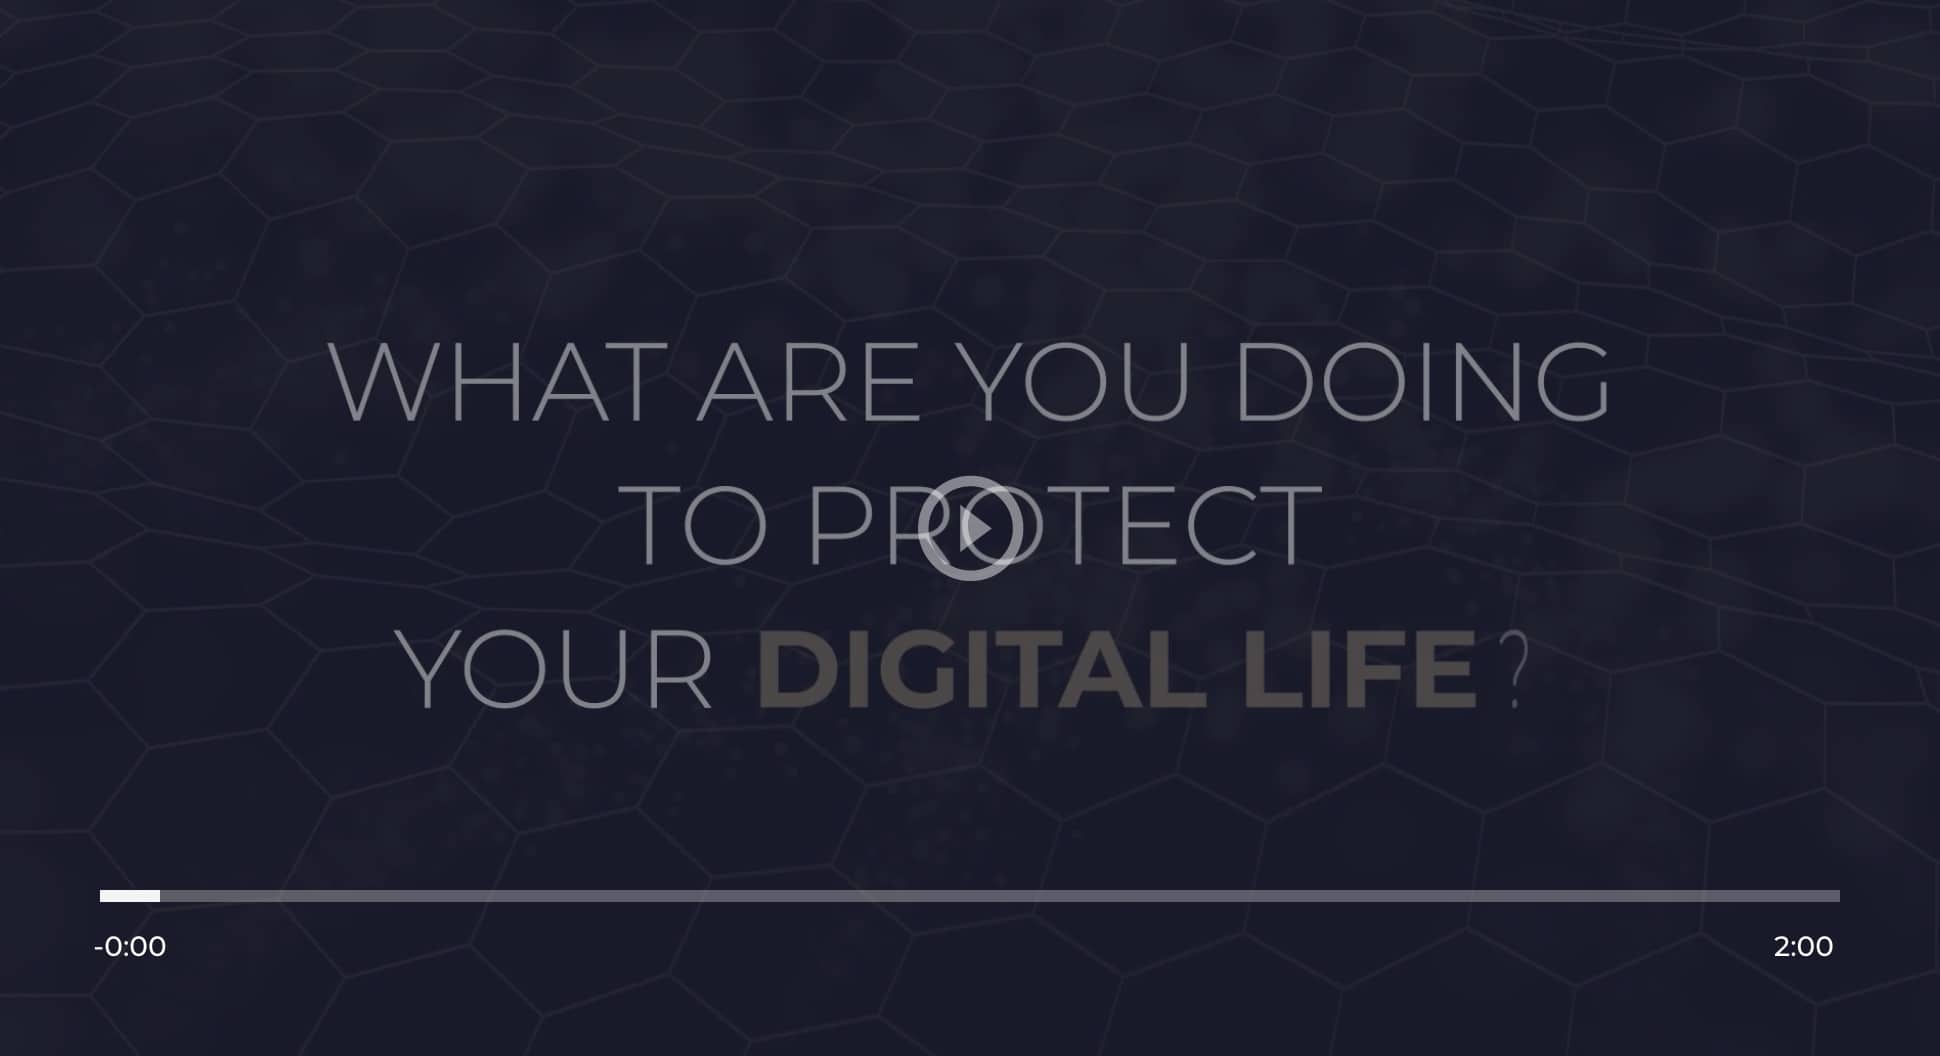 What are you doing to protect you digital life?